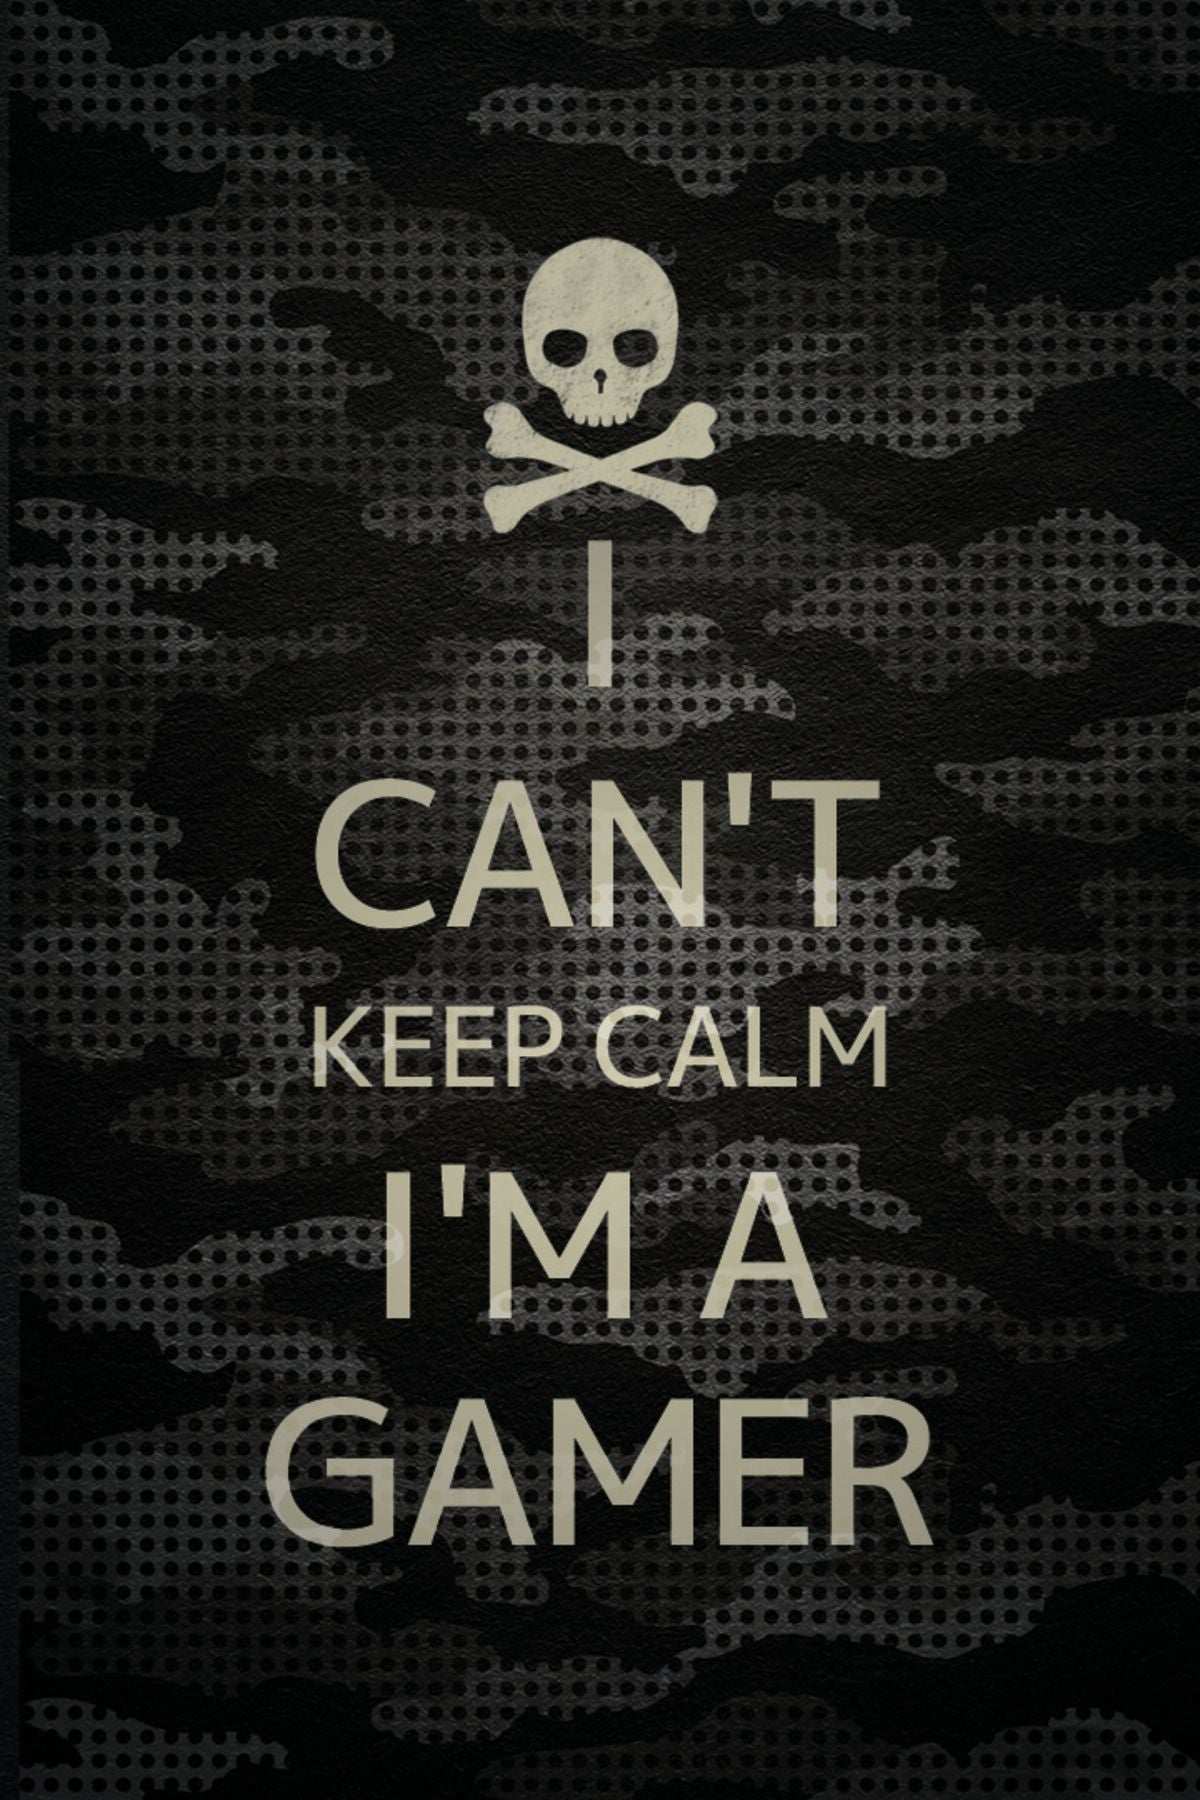 Can't Keep Calm Gamer Quote